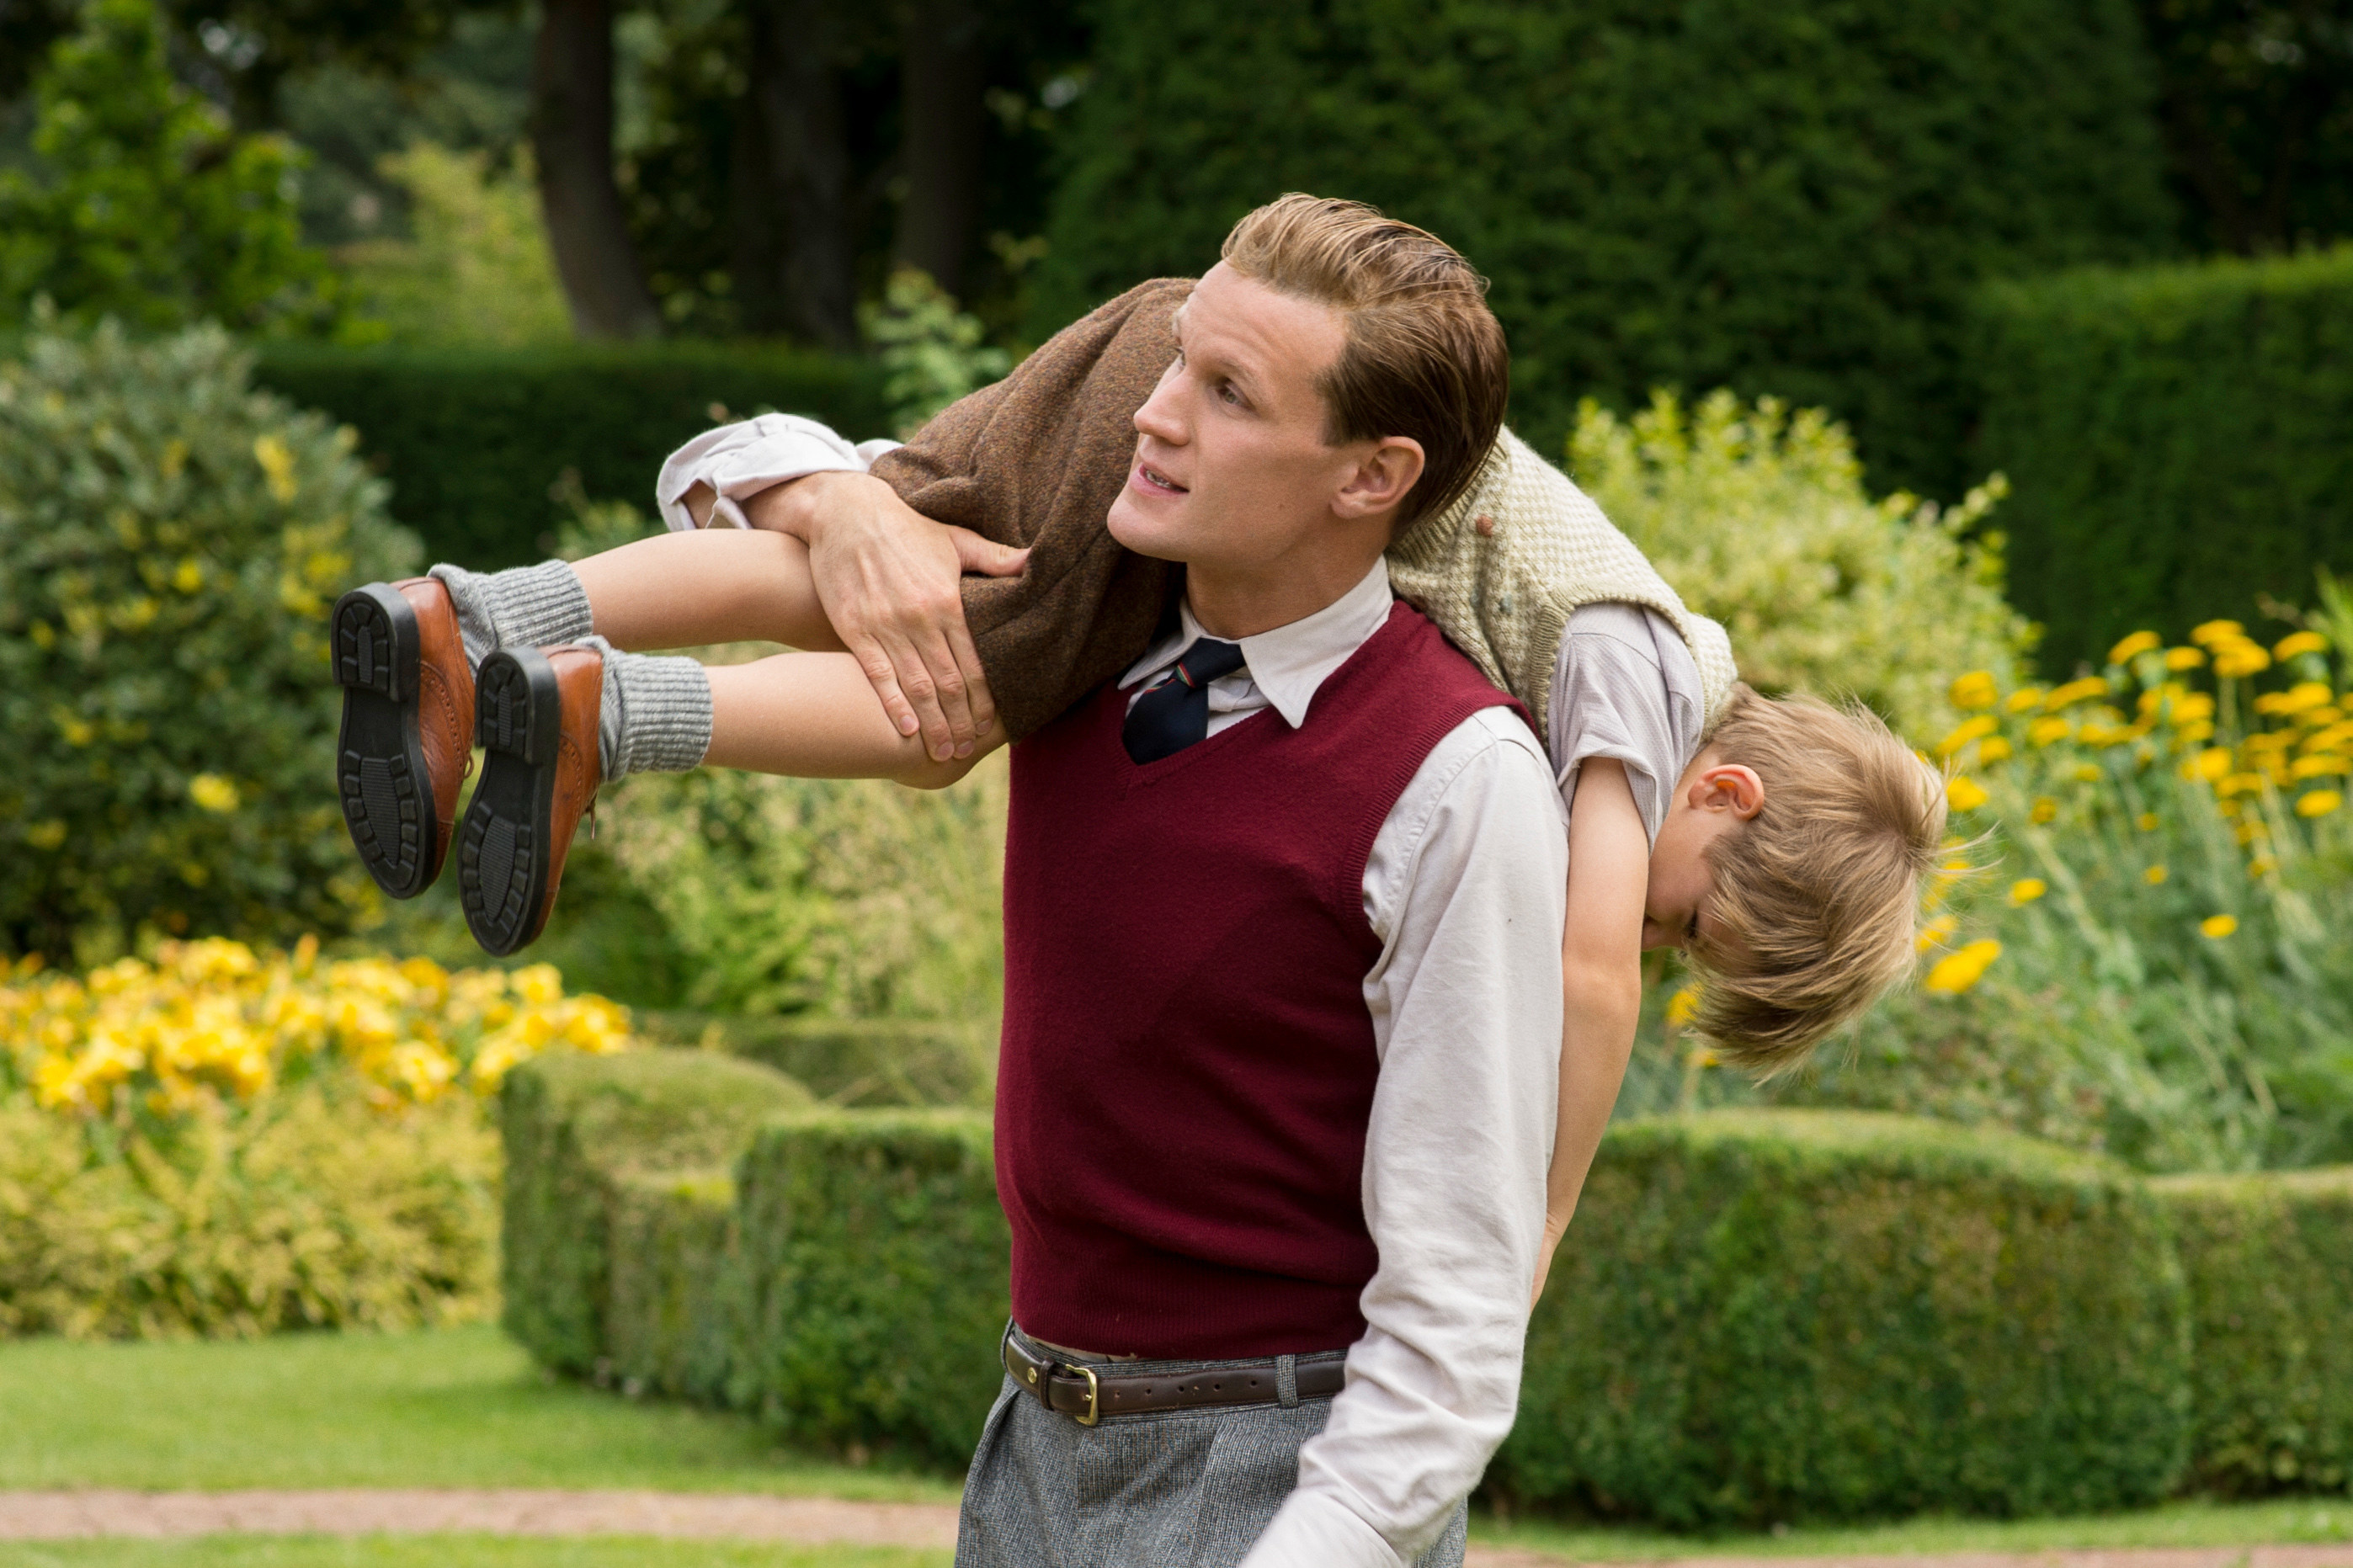 Prince Philip carrying a young Prince Charles over his shoulder